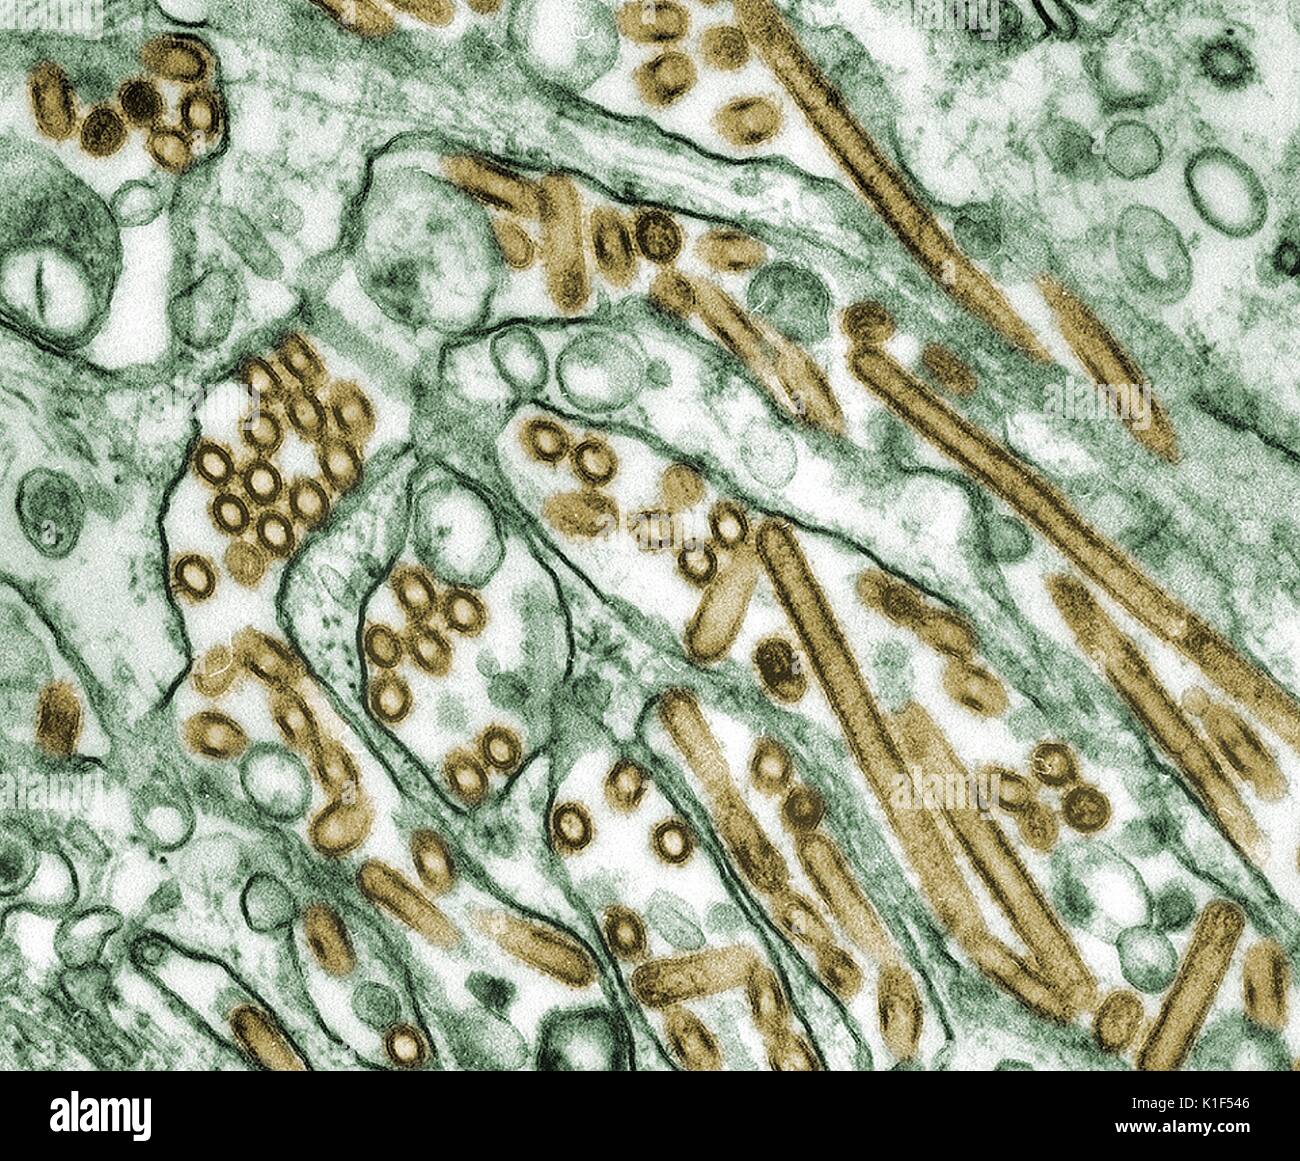 Colorized transmission electron micrograph of Avian influenza A H5N1 viruses (seen in gold) grown in MDCK cells (seen in green). IMGSETINF, Avian influenza A viruses do not usually infect humans, however, several instances of human infections and outbreaks have been reported since 1997. When such infections occur, public health authorities monitor these situations closely. Image courtesy CDC/Courtesy of Cynthia Goldsmith, Jacqueline Katz, Sherif R. Zaki, 1997. Stock Photo